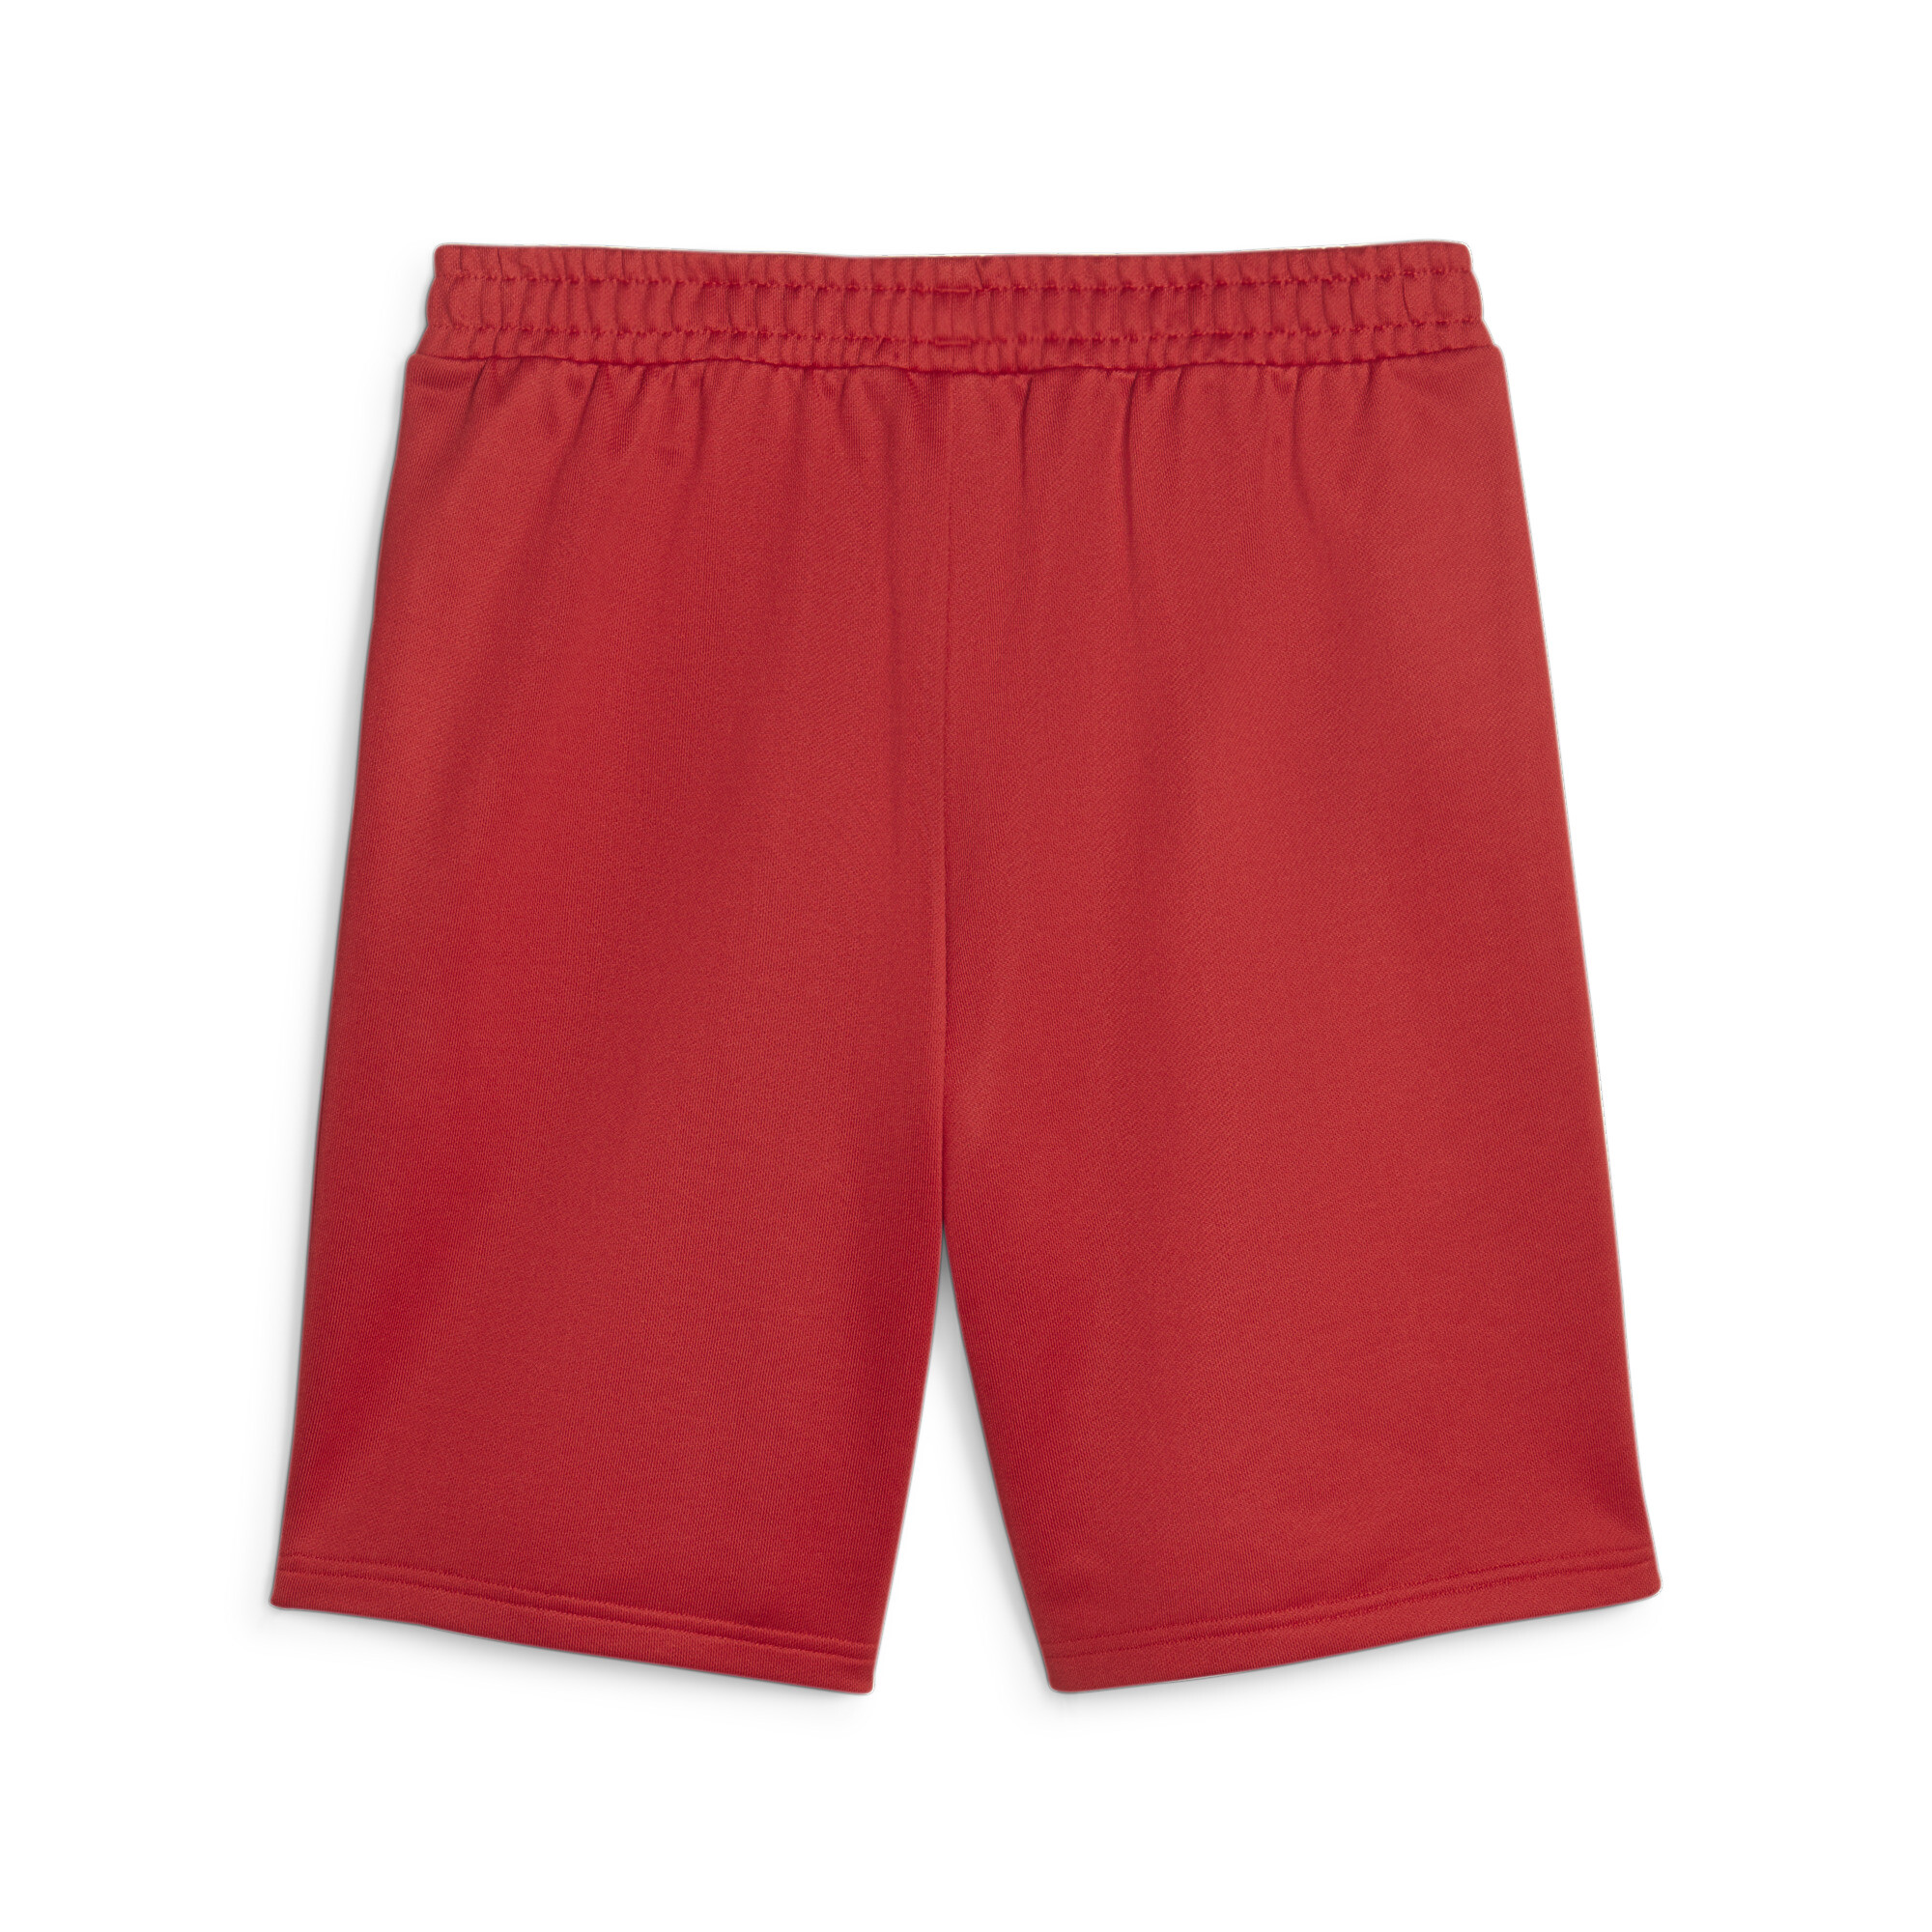 Men's Puma Morocco Ftbl Culture Shorts, Red, Size XS, Clothing